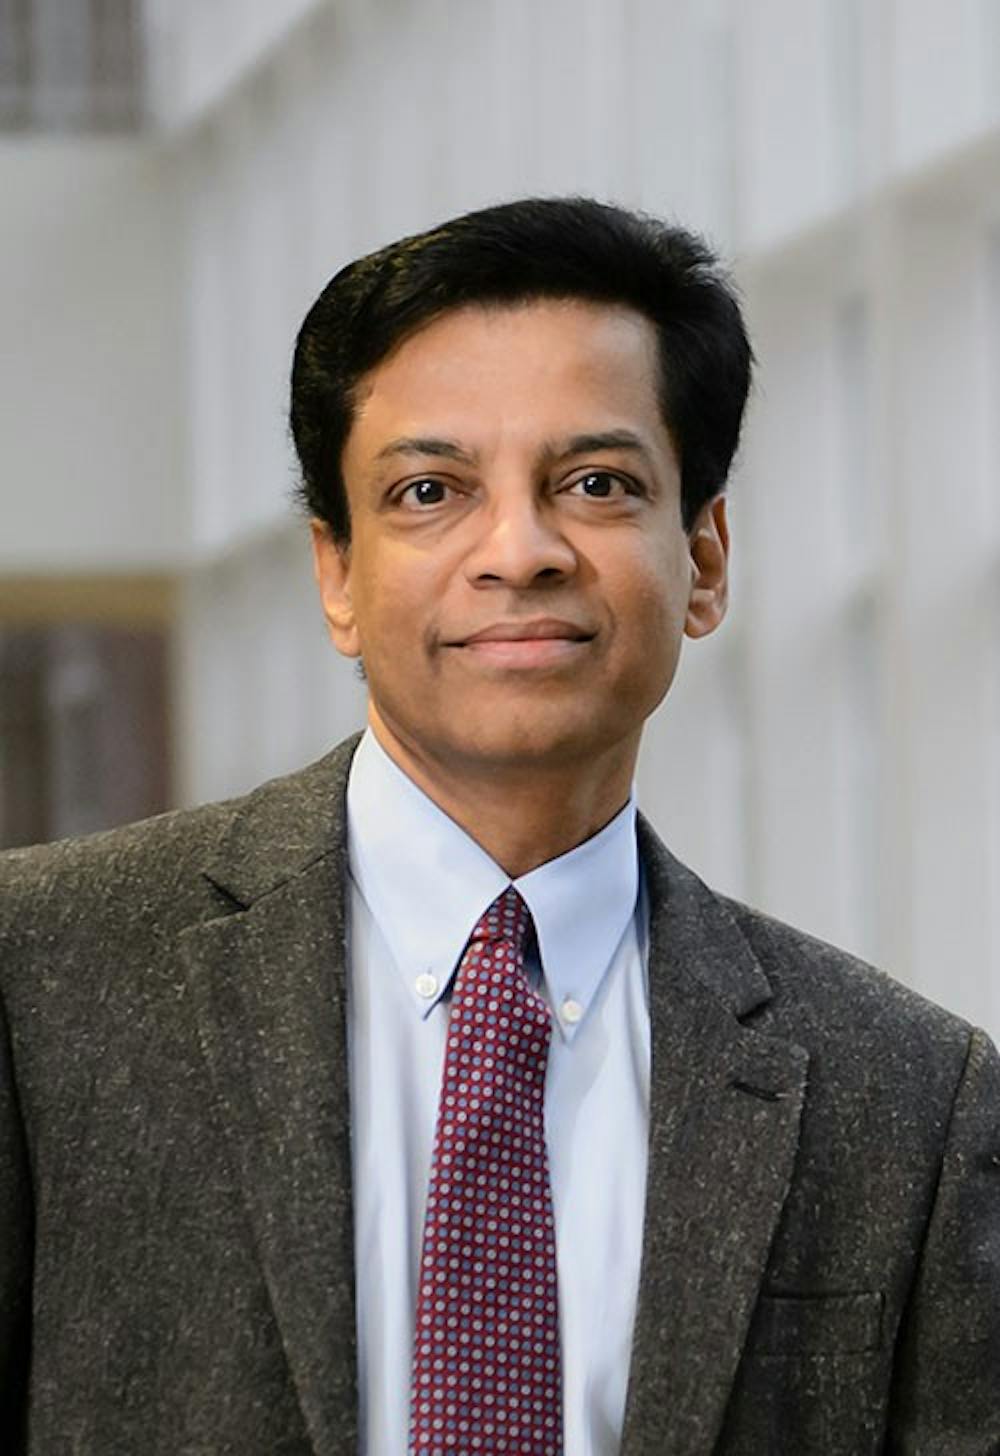 Ramasubramanian will assume the position of vice president for research Aug. 8 and report directly to the President.